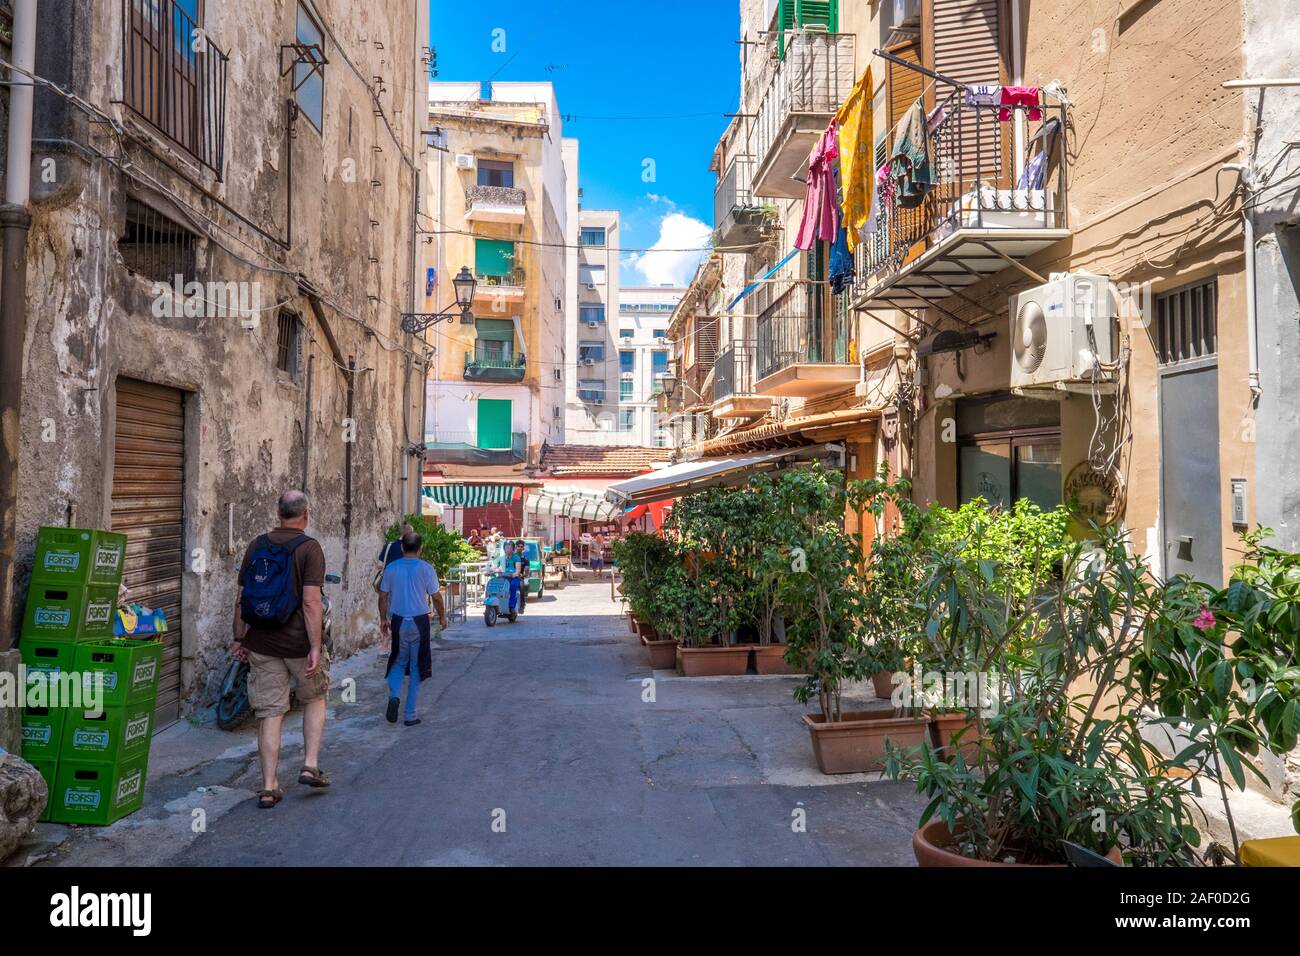 Urban scene from Palermo, Sicily.  Palermo is more than 2700 years old with a rich and diverse history and culture. Stock Photo